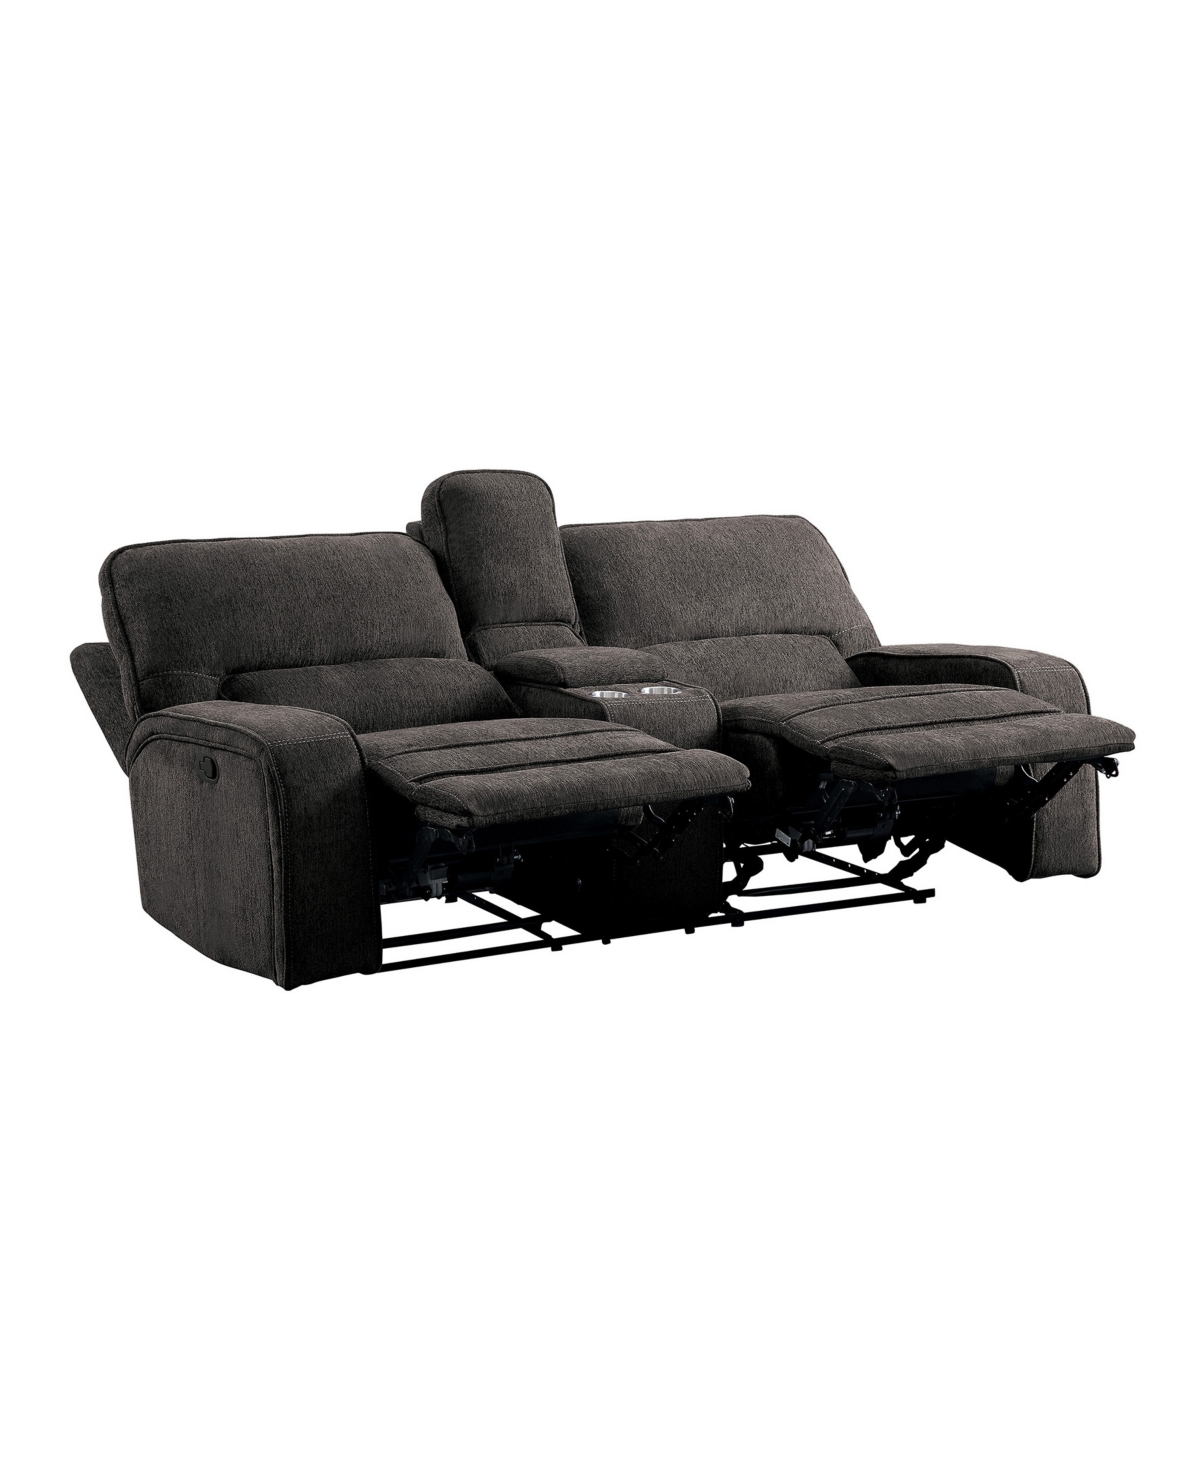 Elevated Recliner Loveseat